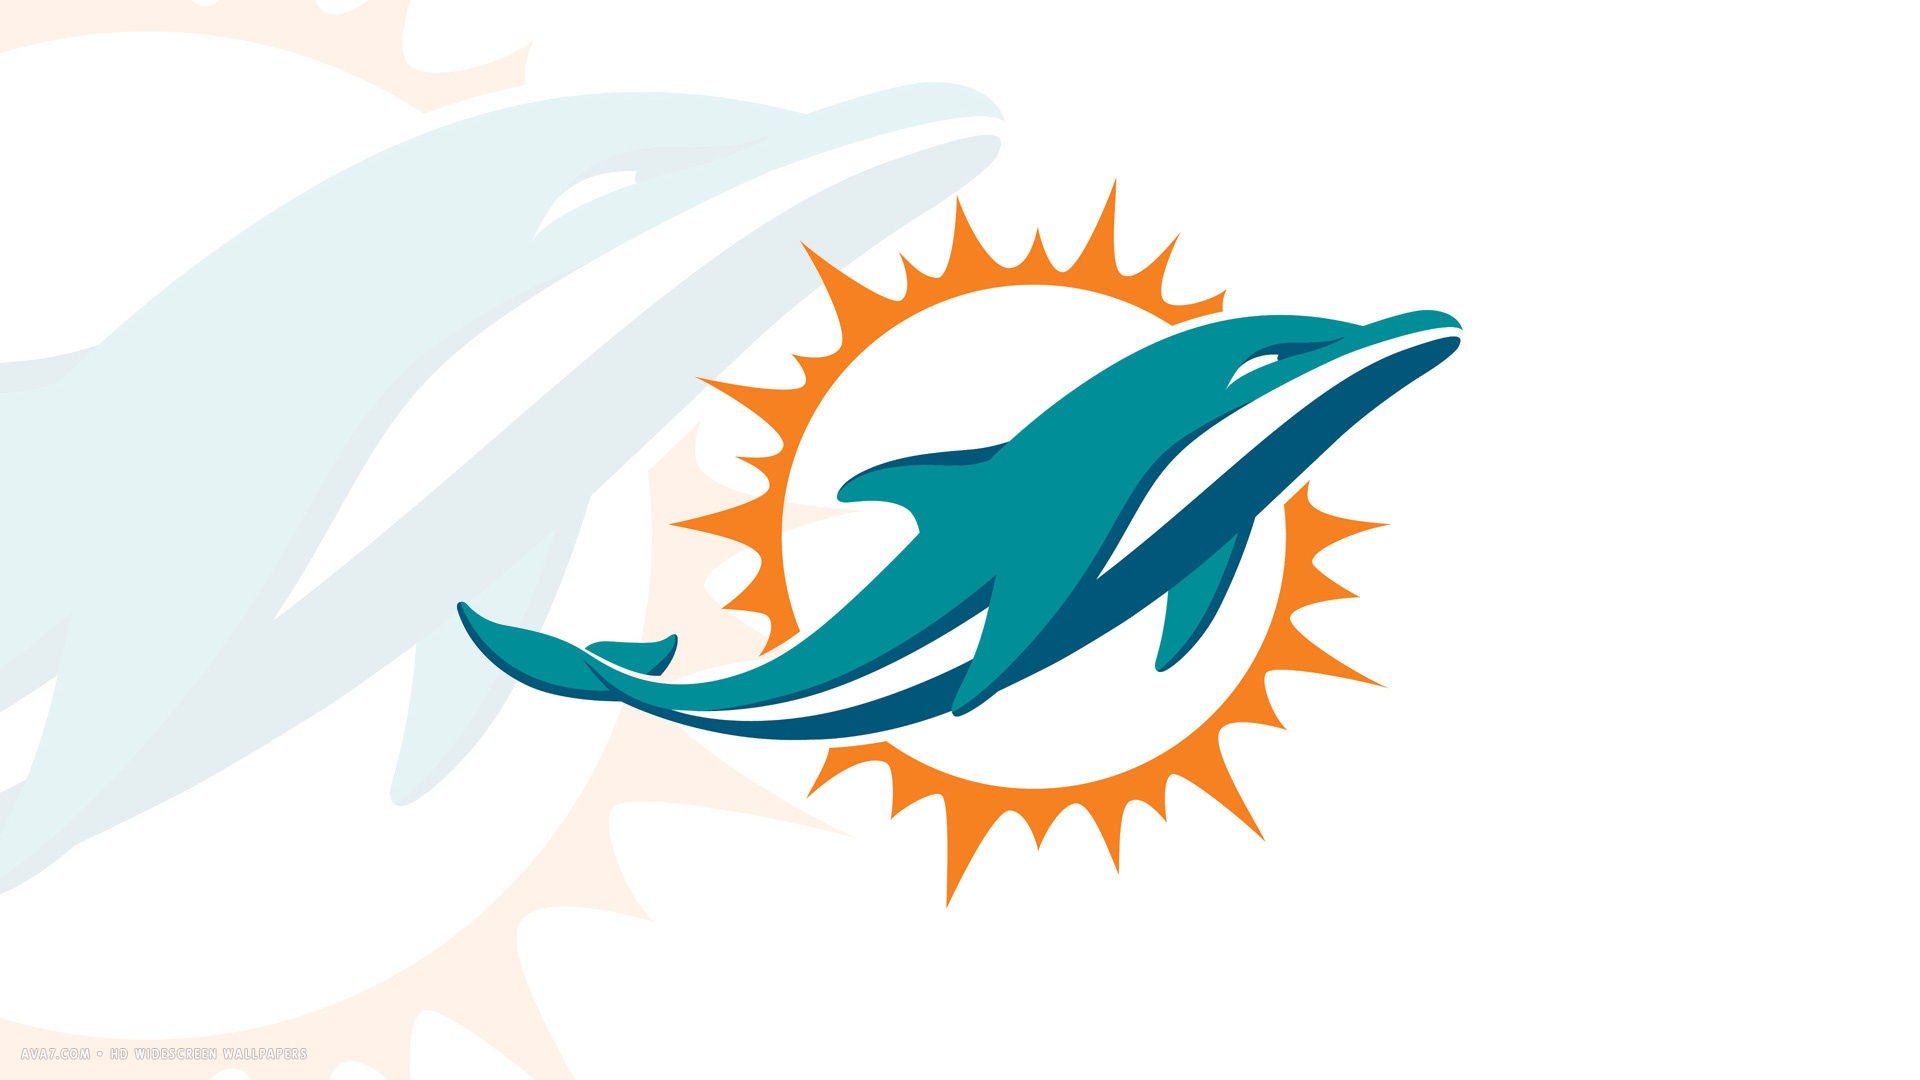 Miami Dolphins Wallpaper For Mac Backgrounds with resolution 1920x1080 pixel. You can make this wallpaper for your Mac or Windows Desktop Background, iPhone, Android or Tablet and another Smartphone device